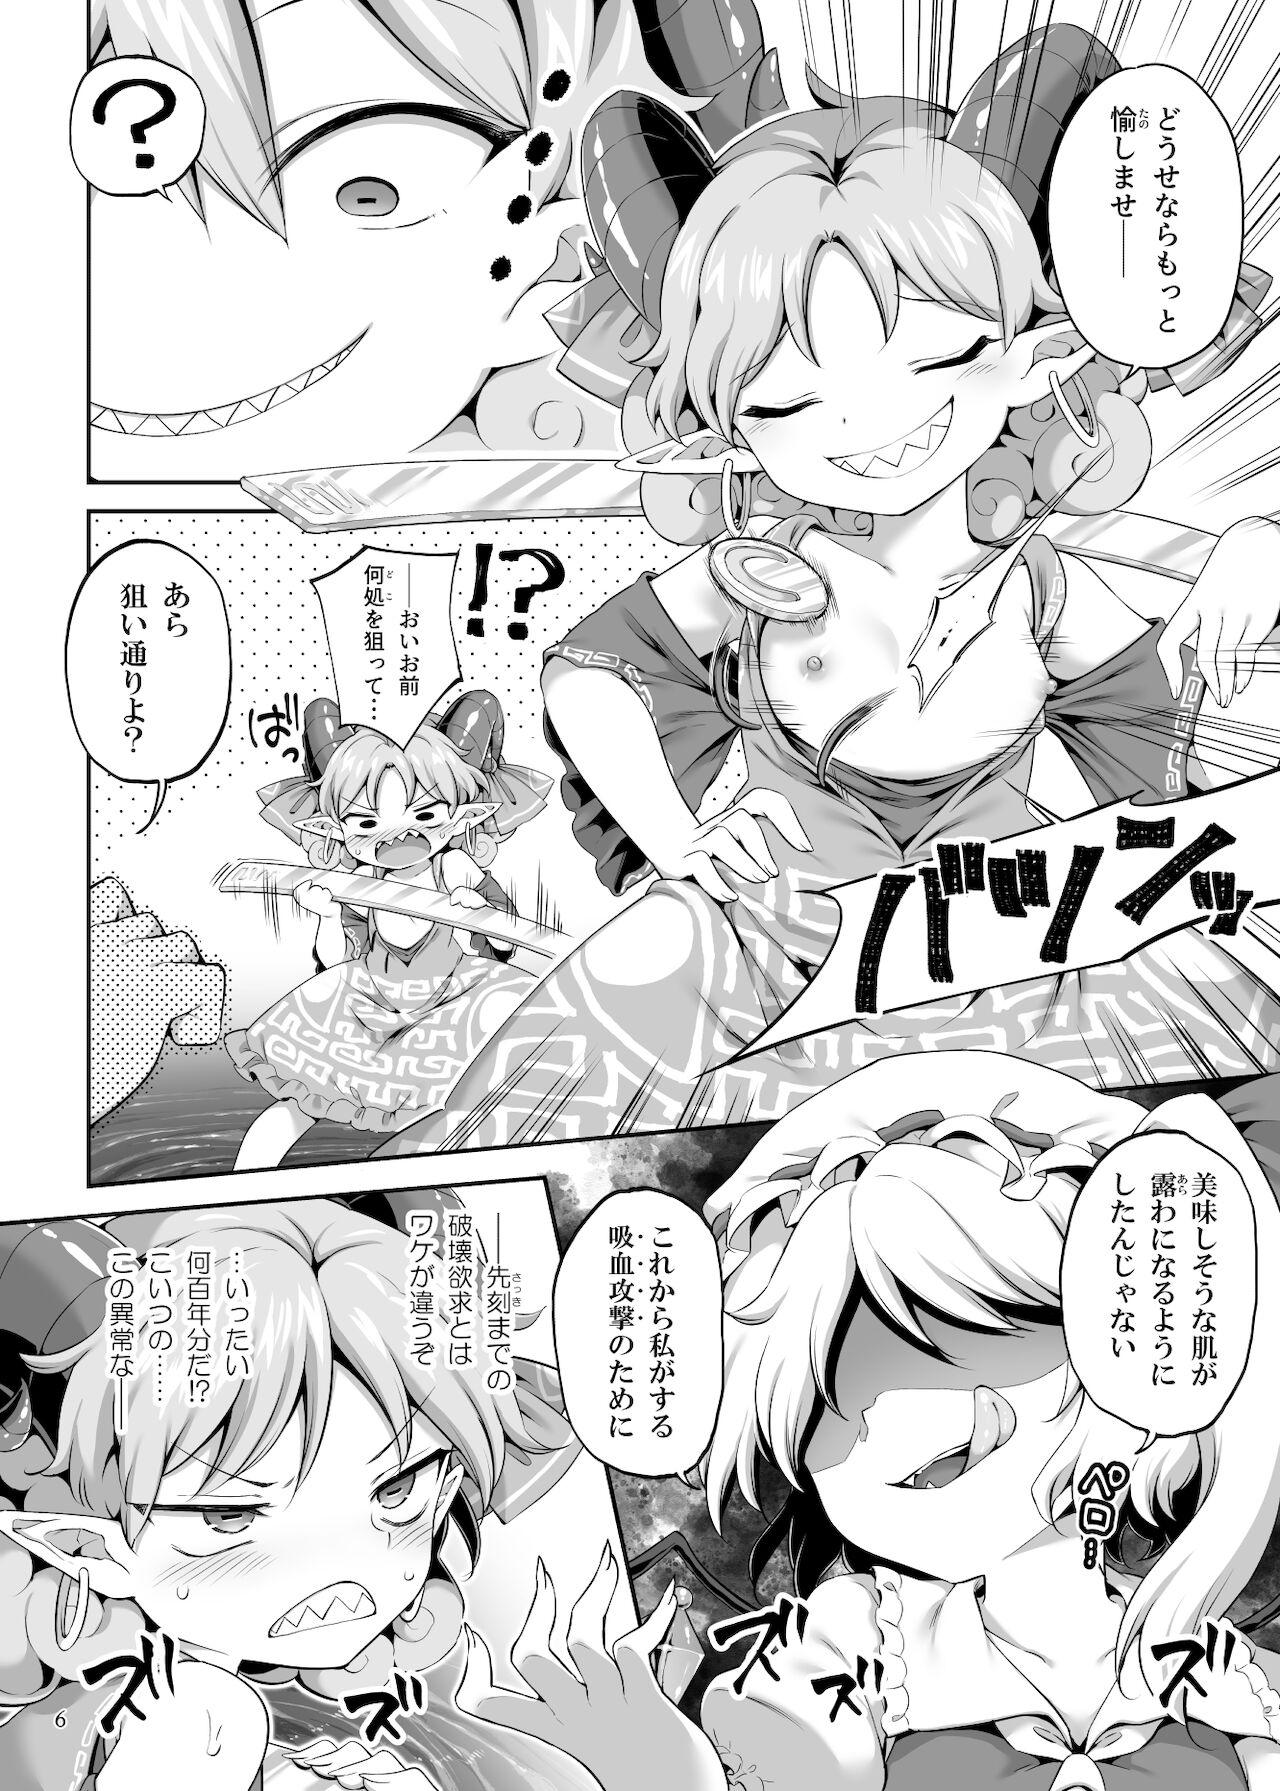 Free Blow Job 吸われて駄目なら吸ってみろ! - Touhou project Grosso - Page 6